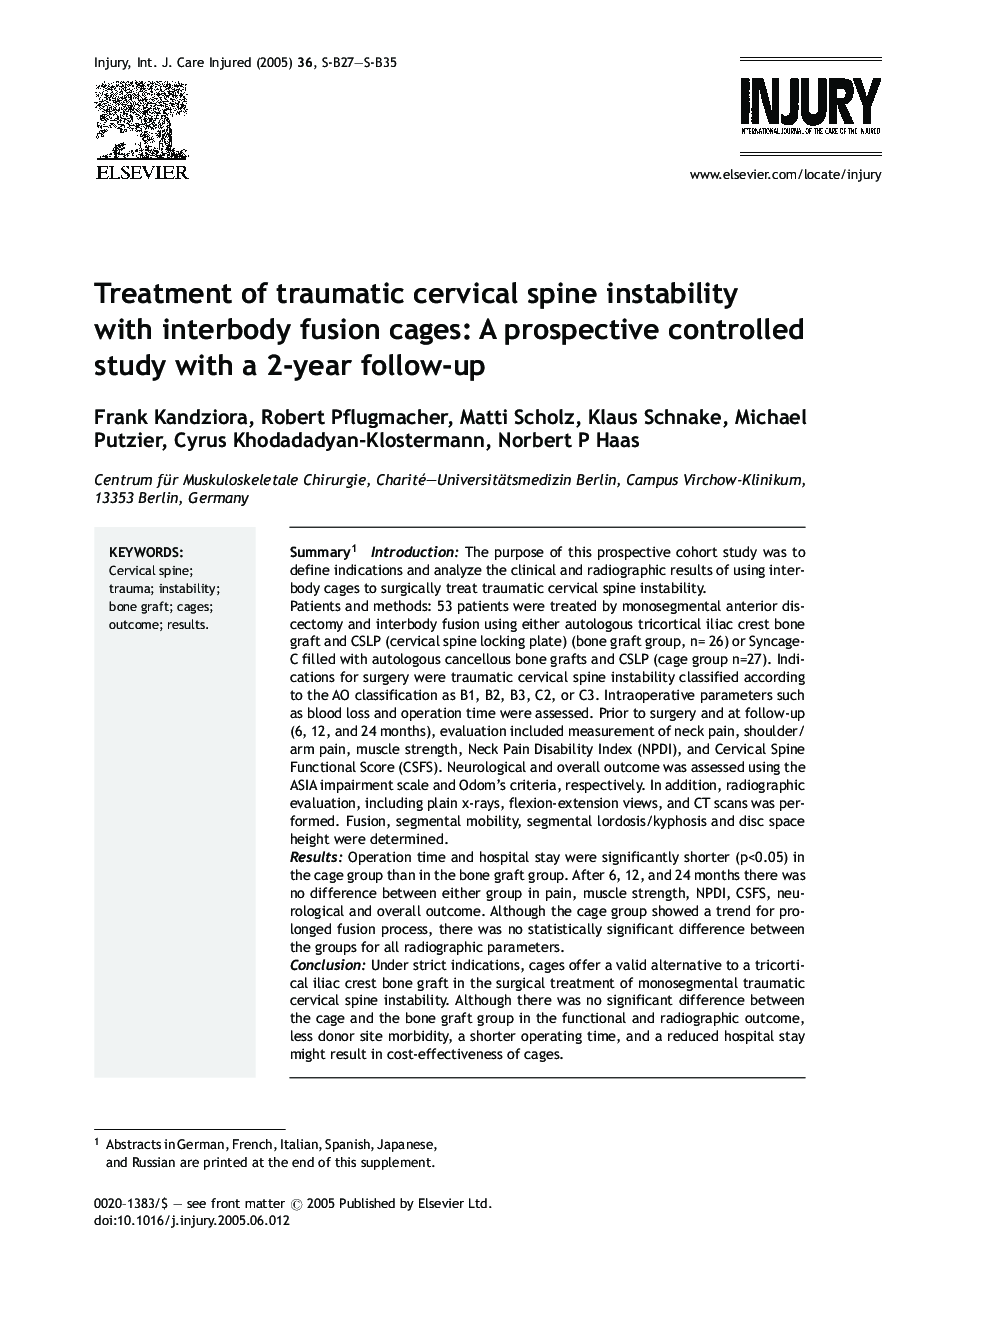 Treatment of traumatic cervical spine instability with interbody fusion cages: A prospective controlled study with a 2-year follow-up